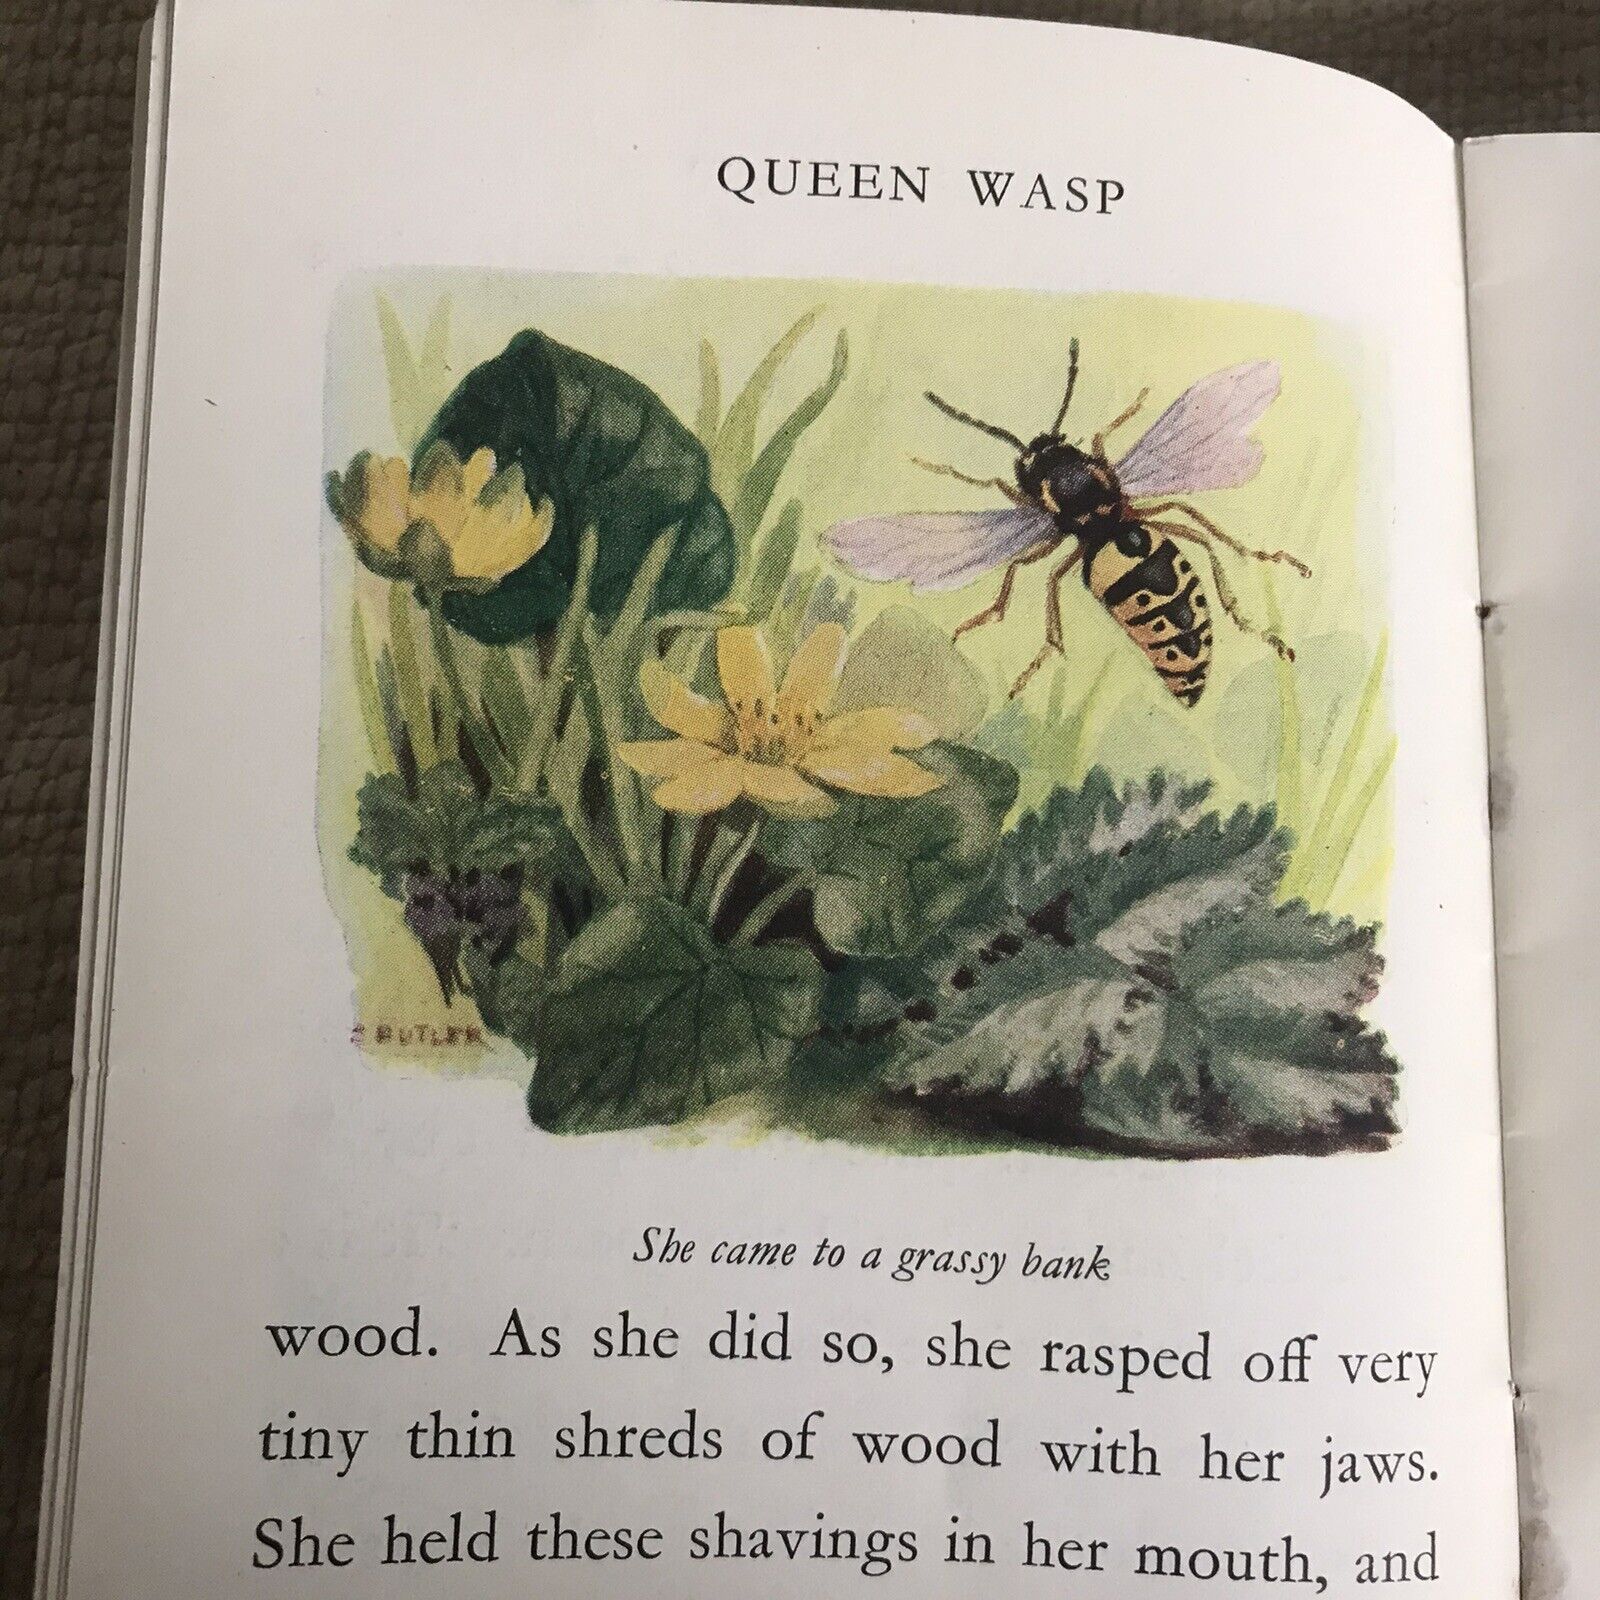 1950 Tales Of The Wild Folk: Queen Wasp - Cecily M. Rutley(B. Butler Illust) Honeyburn Books (UK)